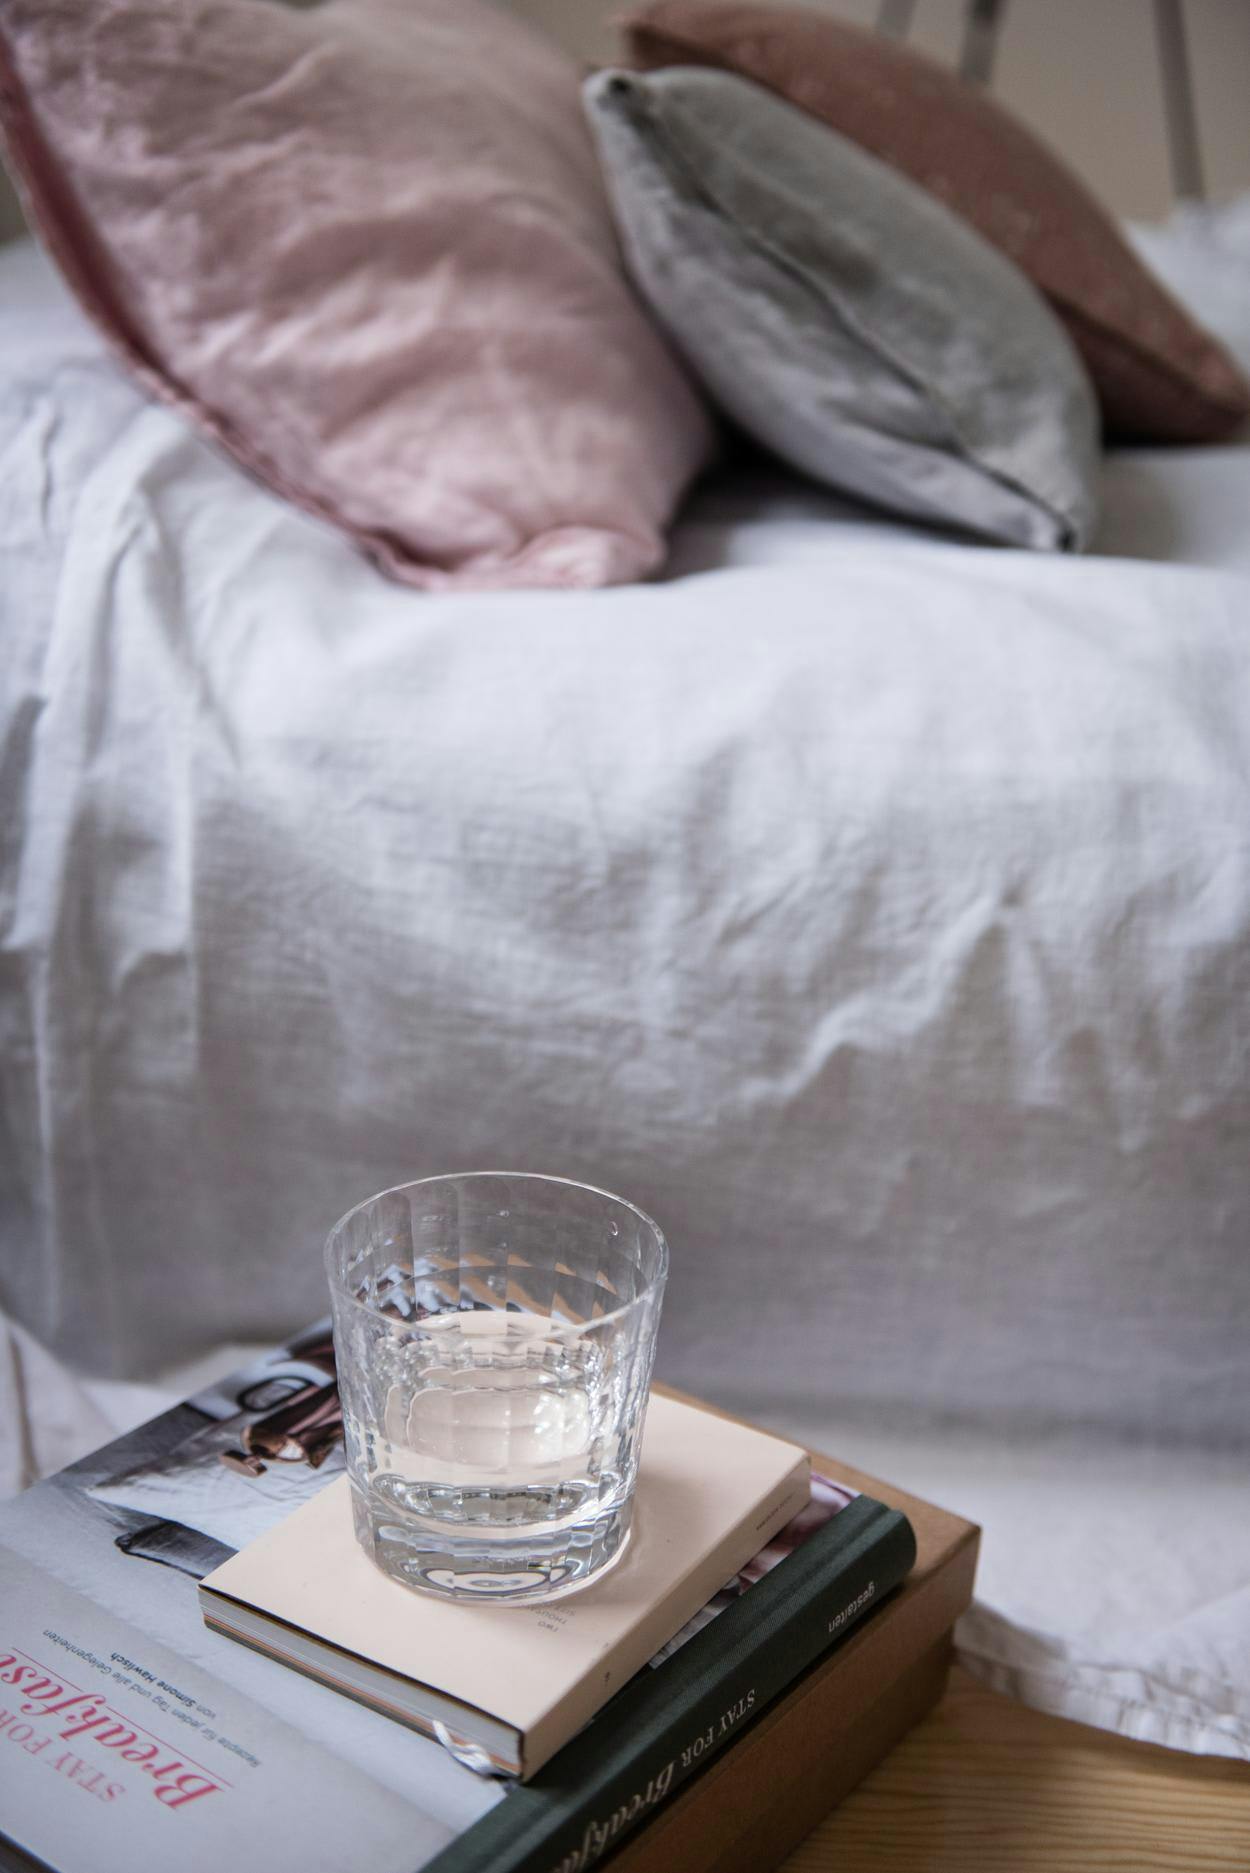 The image features a bed with a white comforter and a glass of water on top of it. The glass is placed on a small table, which is also on the bed. The bed appears to be a twin bed, and the glass of water is positioned near the edge of the bed.

In addition to the glass of water, there is a book on the bed, which is placed on the left side of the bed. The book appears to be a small, thin book, possibly a travel guide or a guide to a specific location. The scene suggests a cozy and relaxing atmosphere, with the b